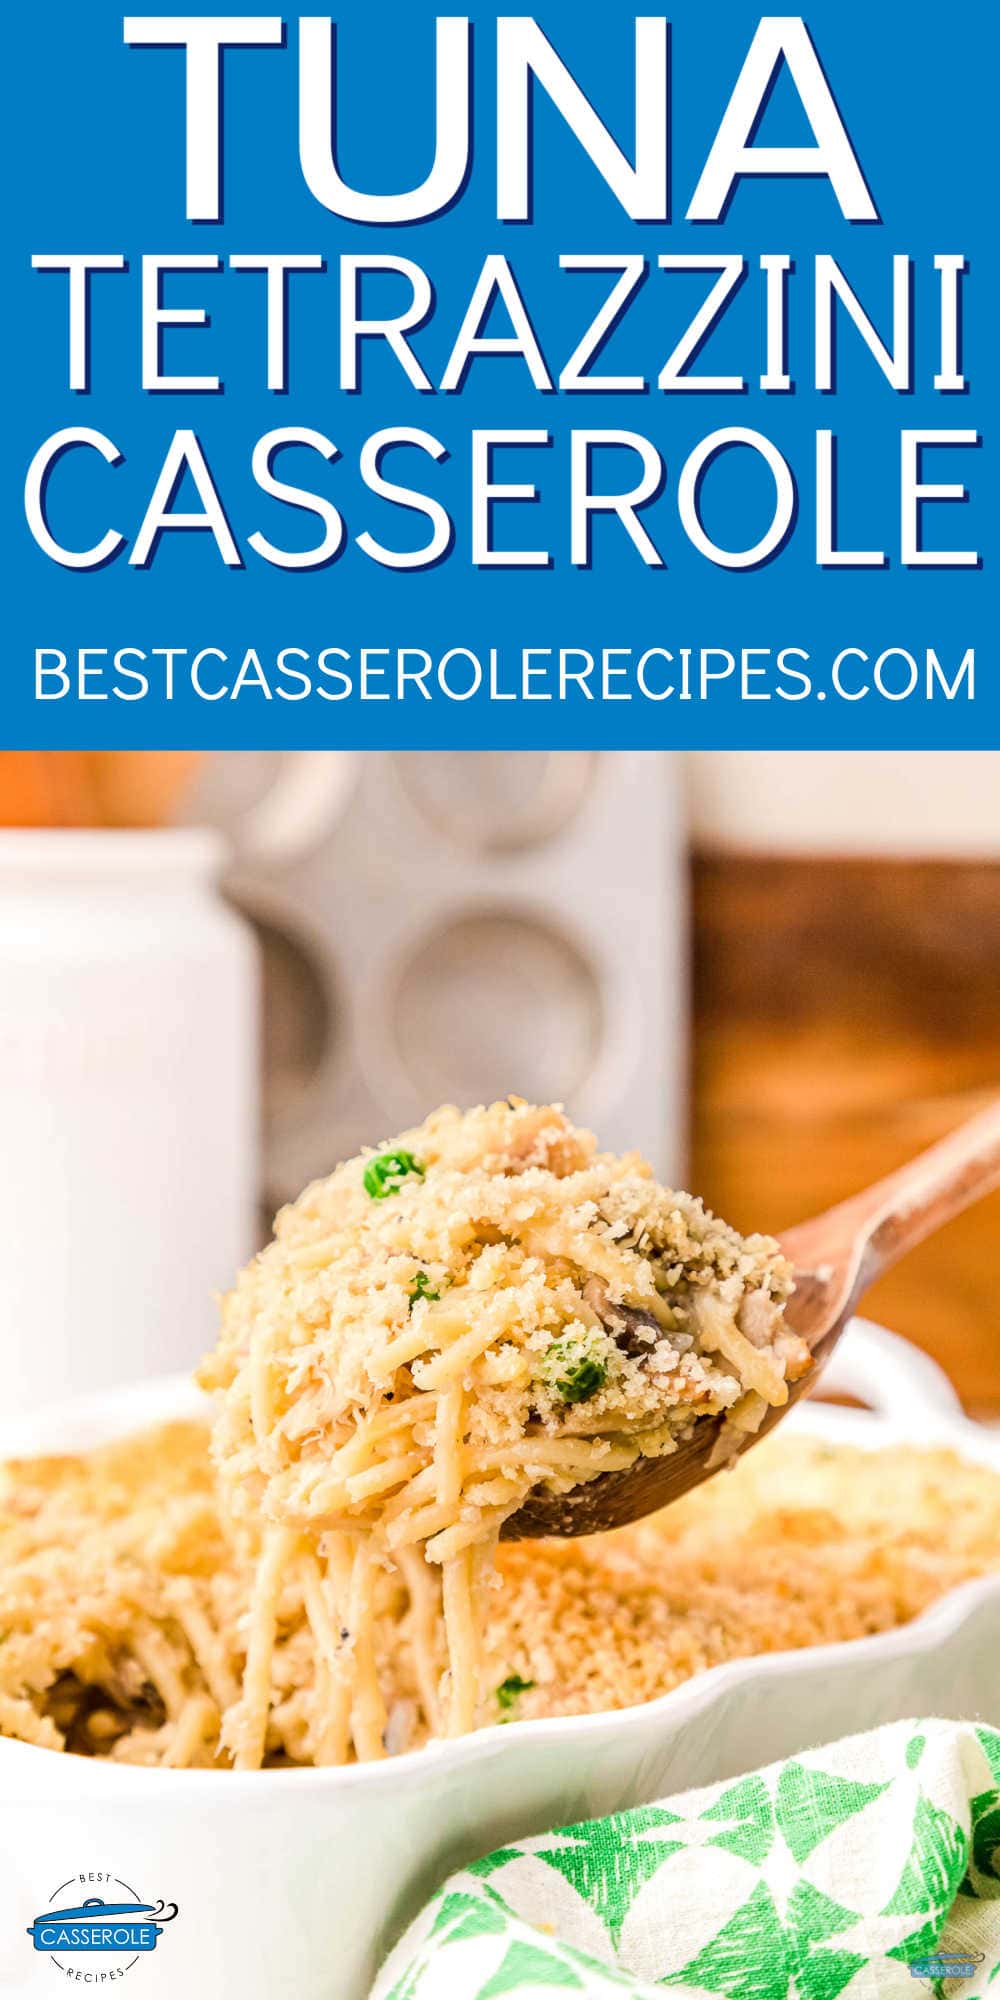 scoop of tuna tetrazzini with blue banner and white text